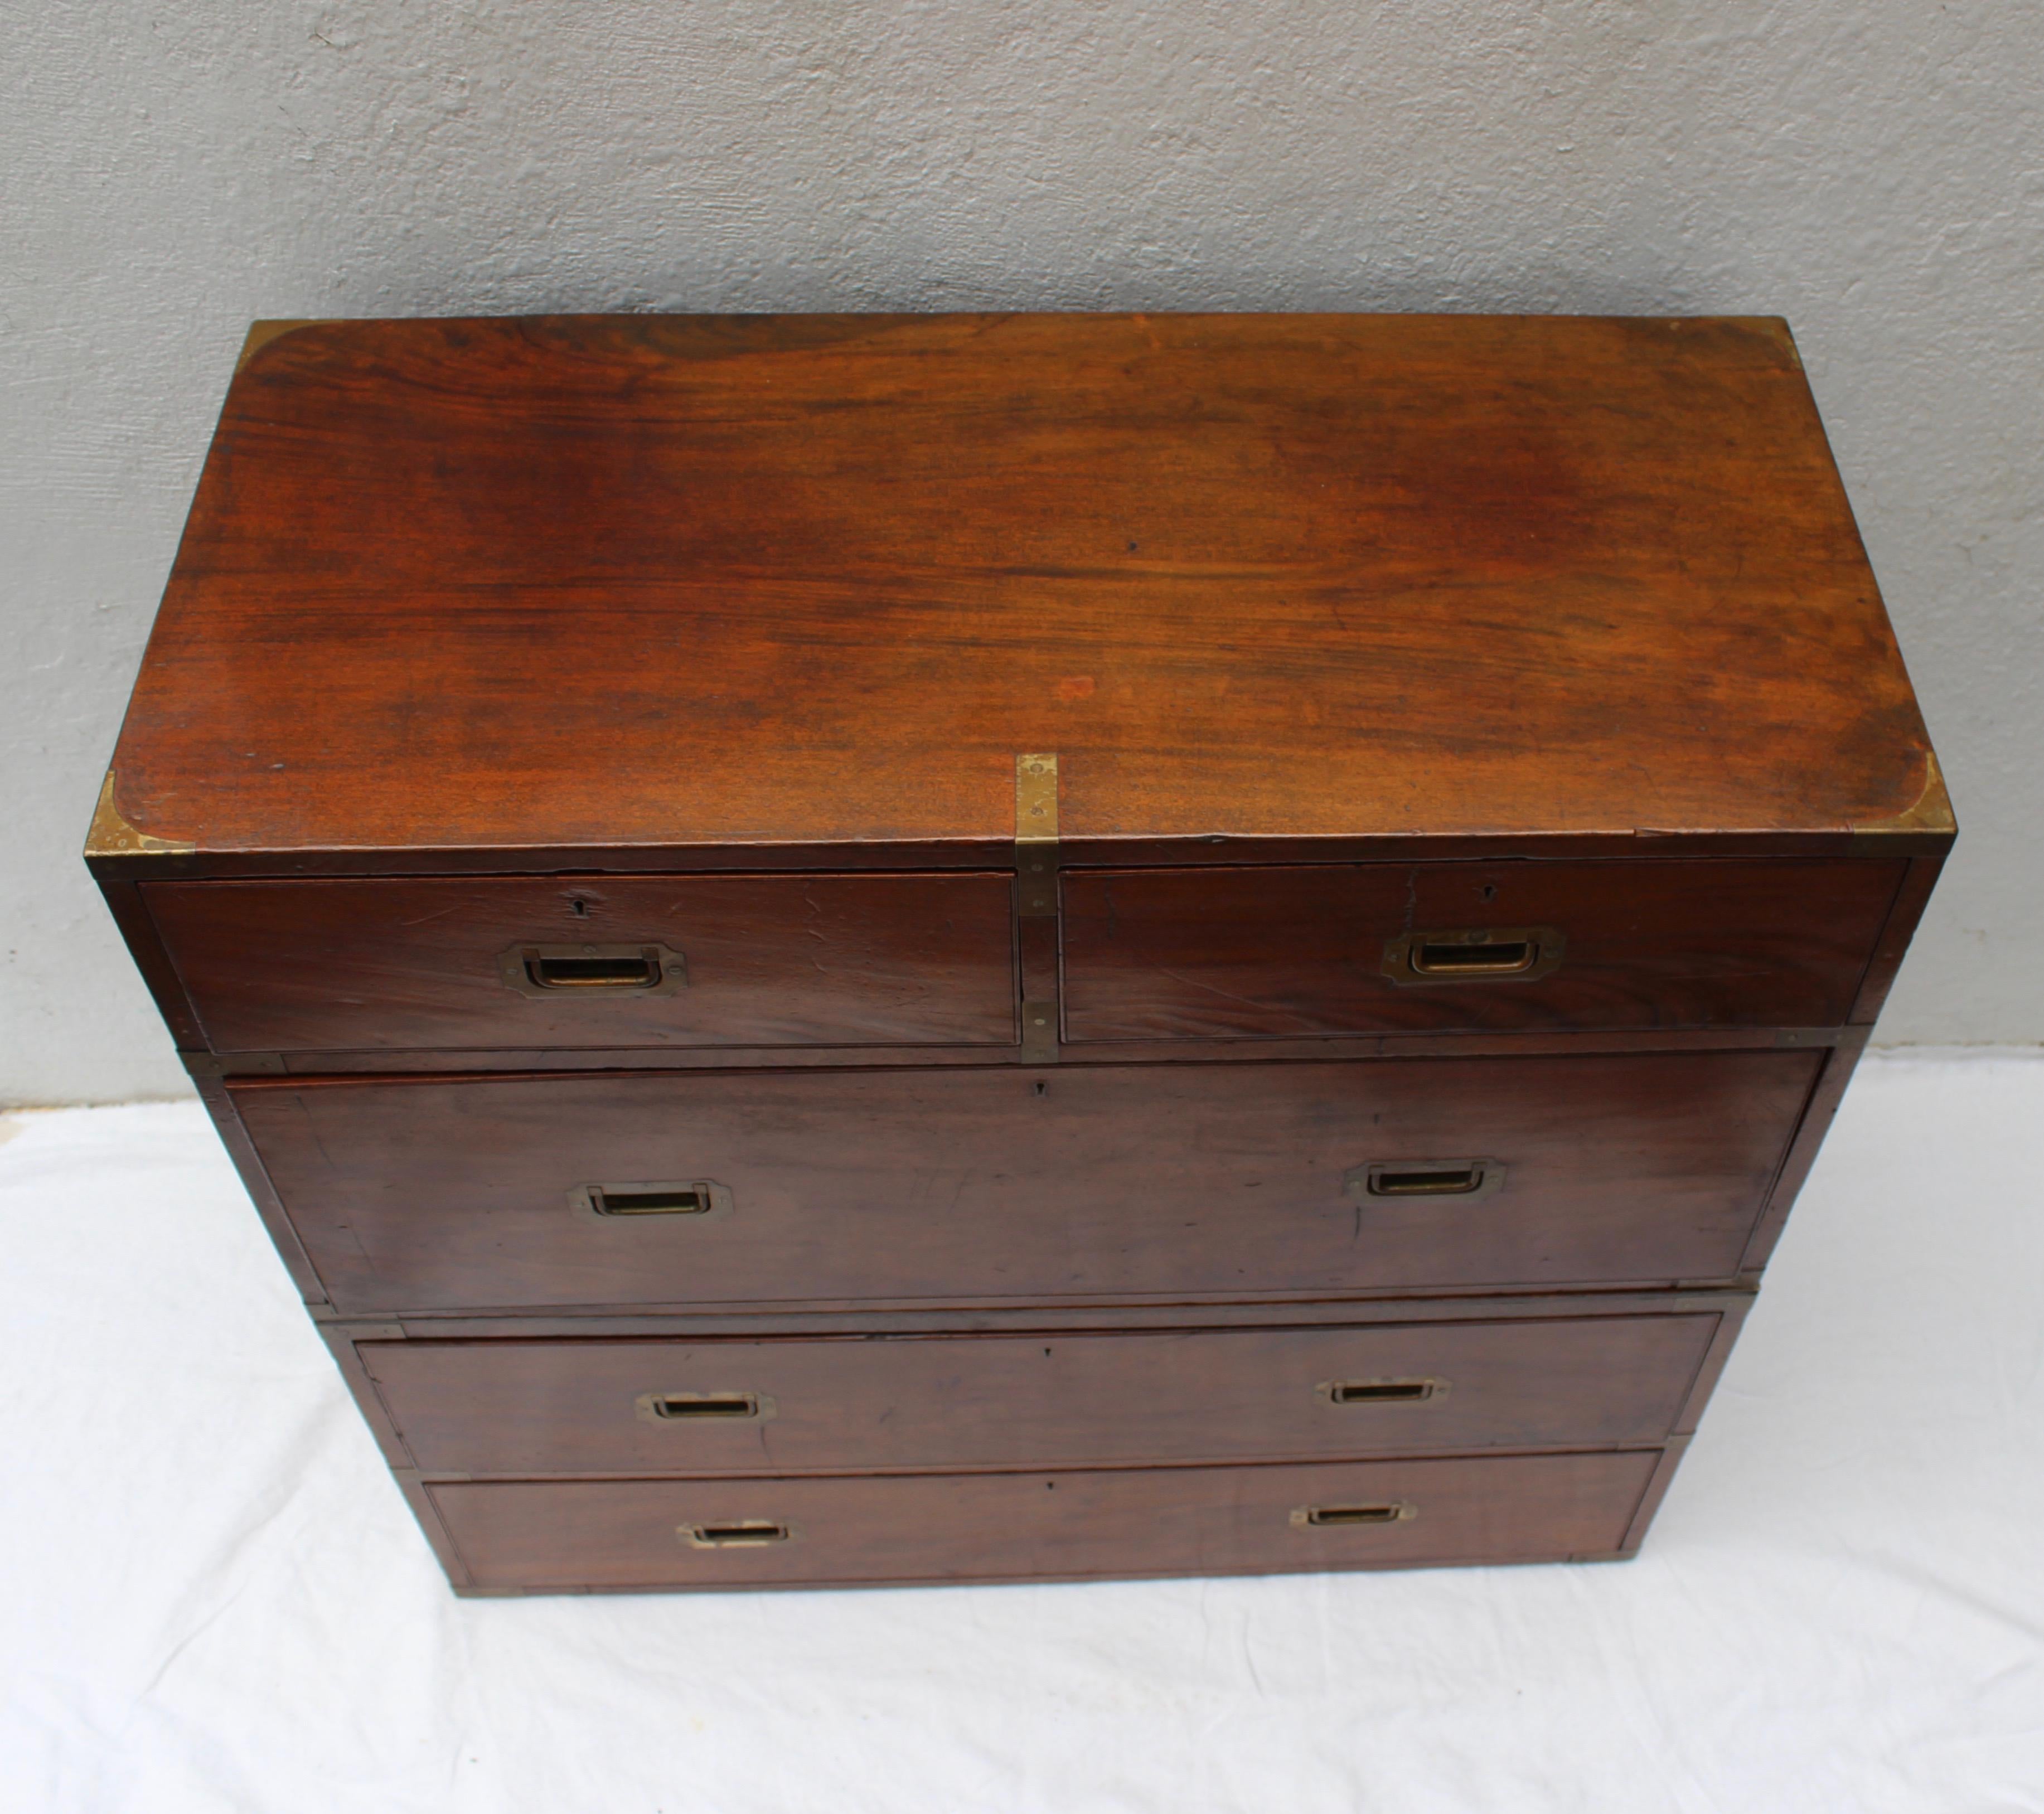 19th century English two-part campaign chest. Lower part is finished on top so that both pieces could be separated to make nightstands with new iron bases.